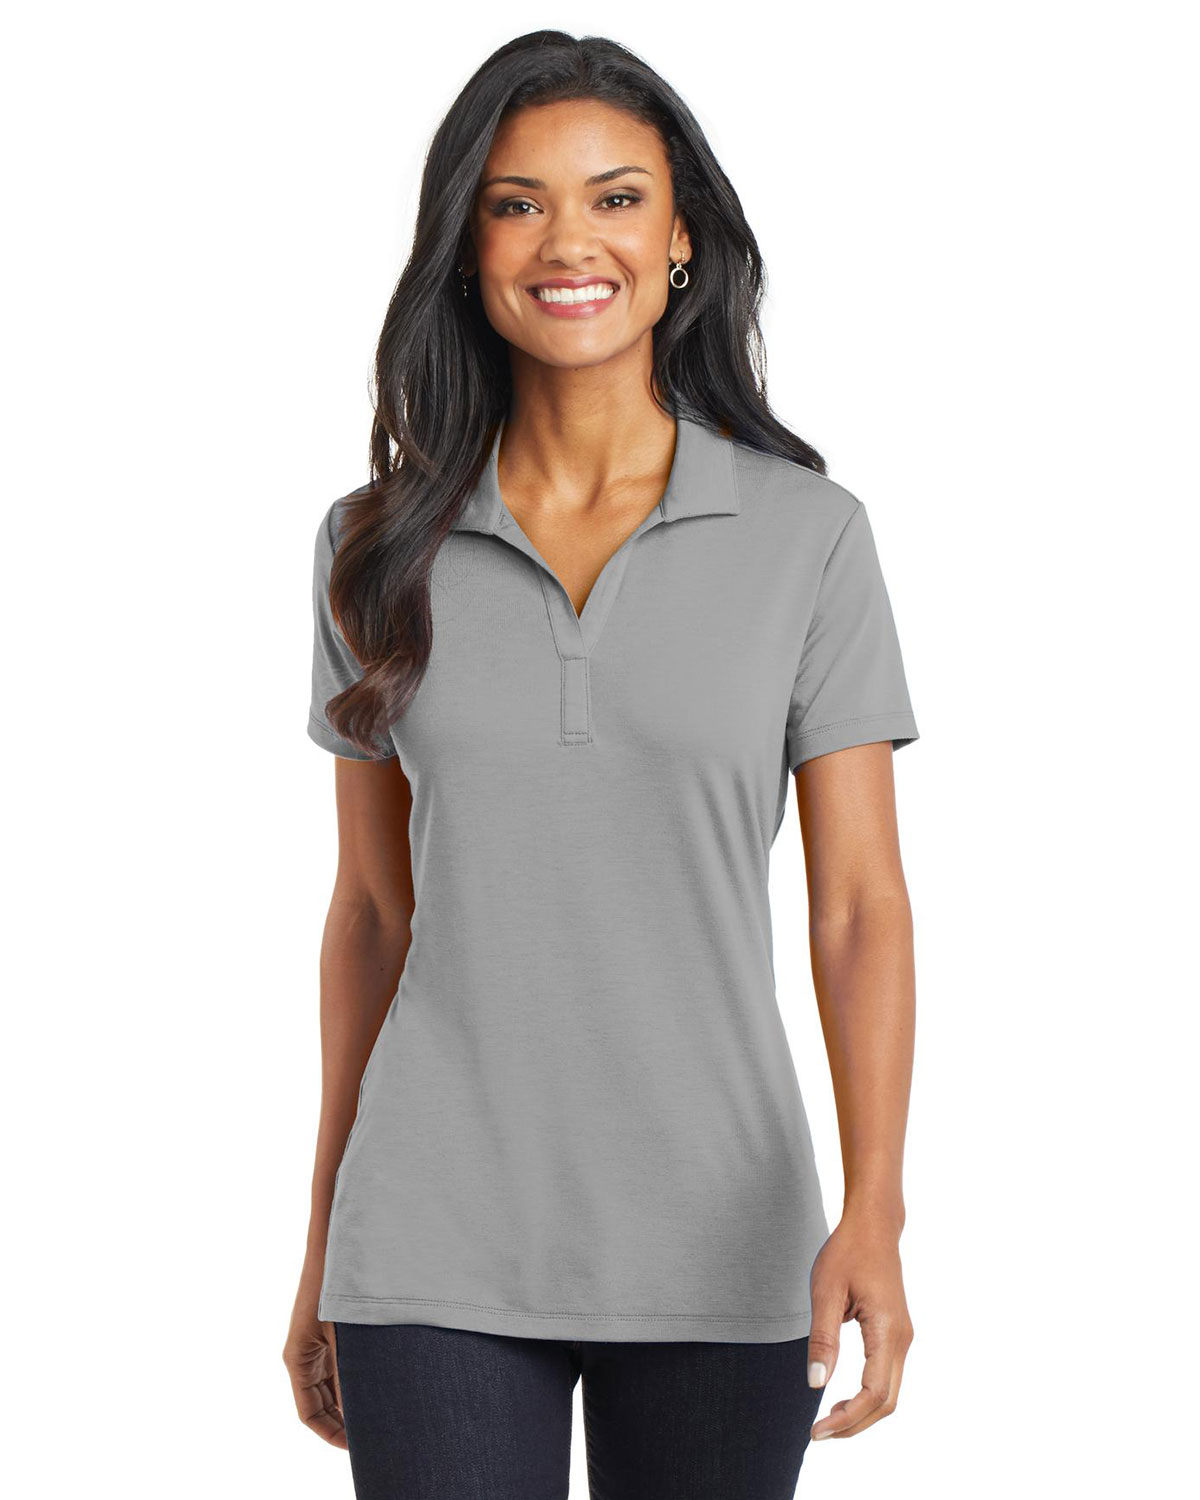 Port Authority L568 Women Cotton Touch Performance Polo at Apparelstation